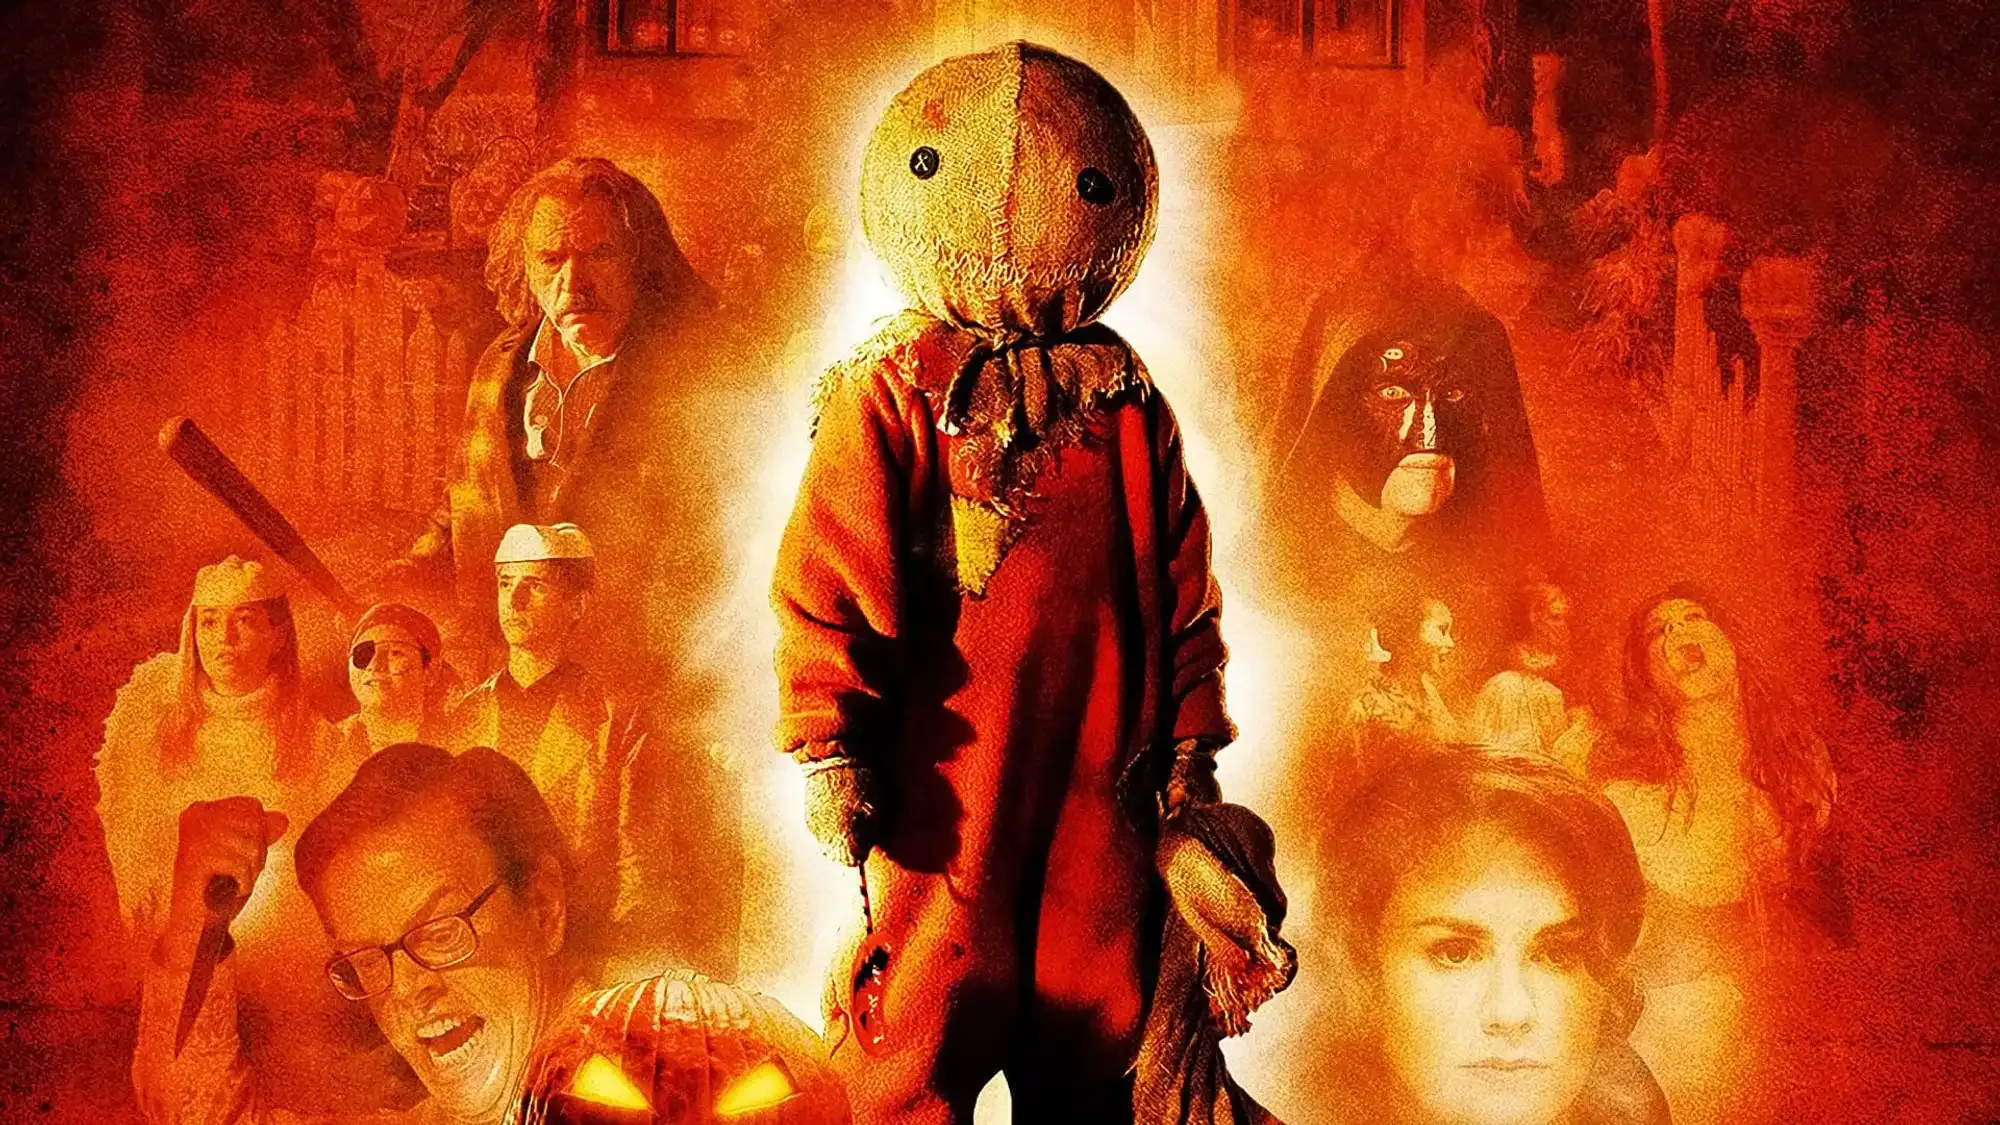 Trick `r Treat movie review